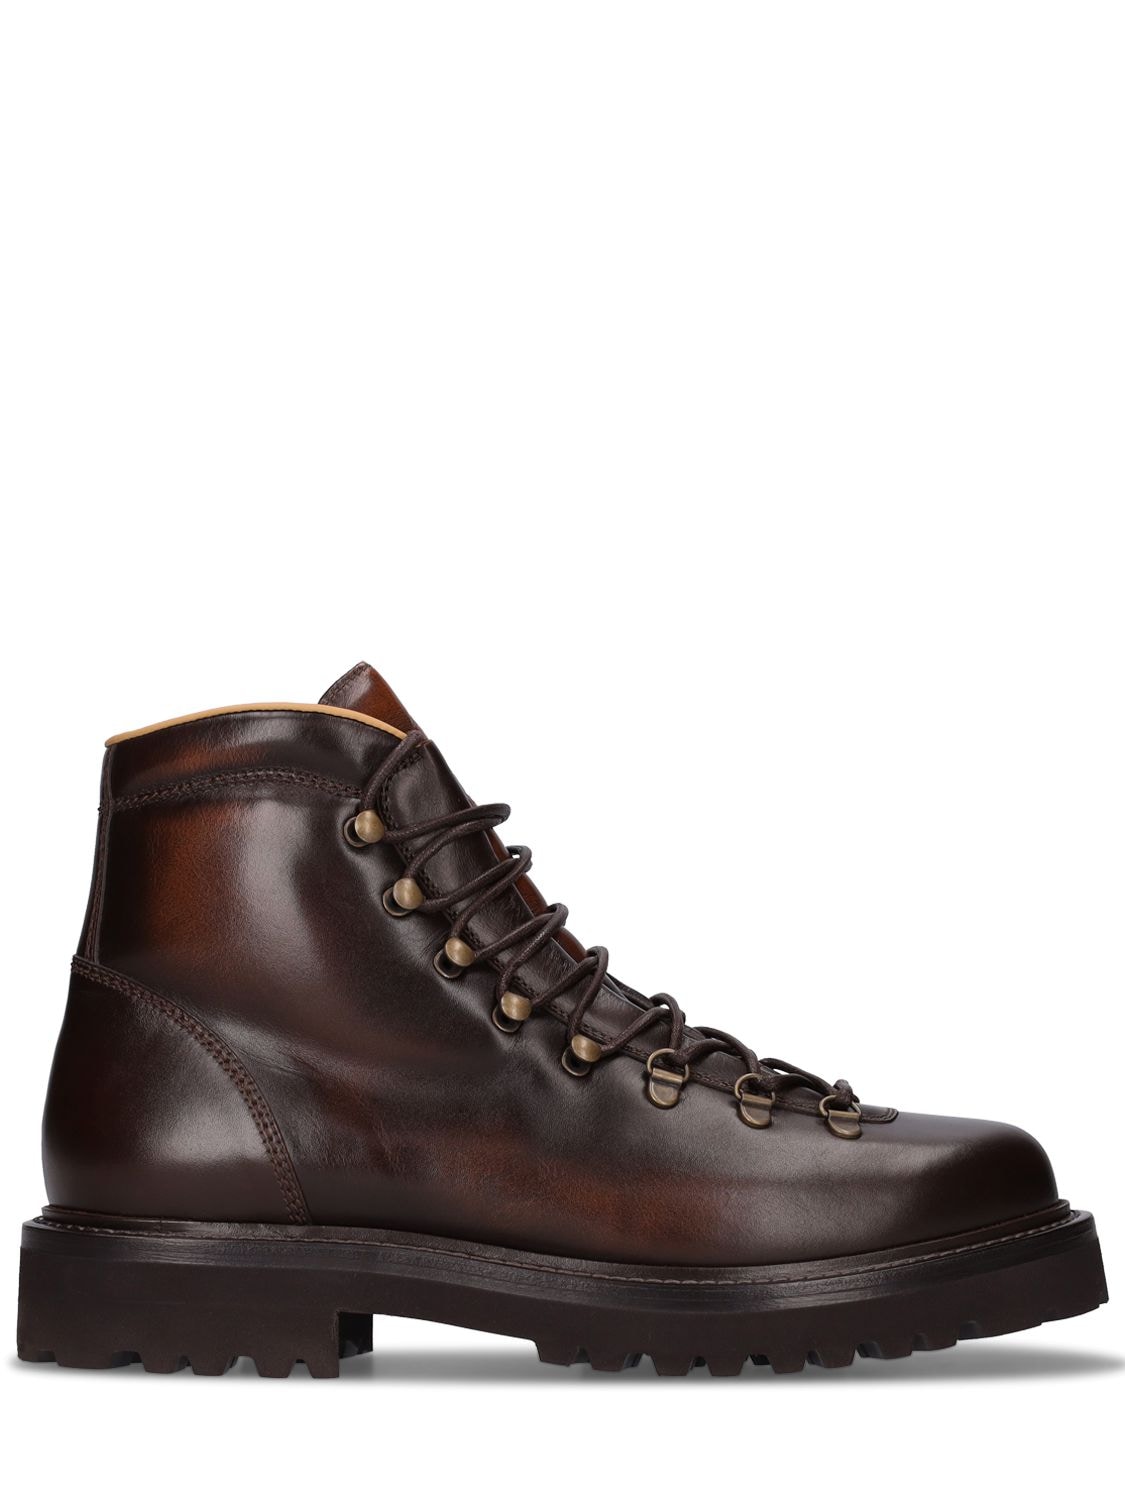 BRUNELLO CUCINELLI LEATHER LACE-UP BOOTS